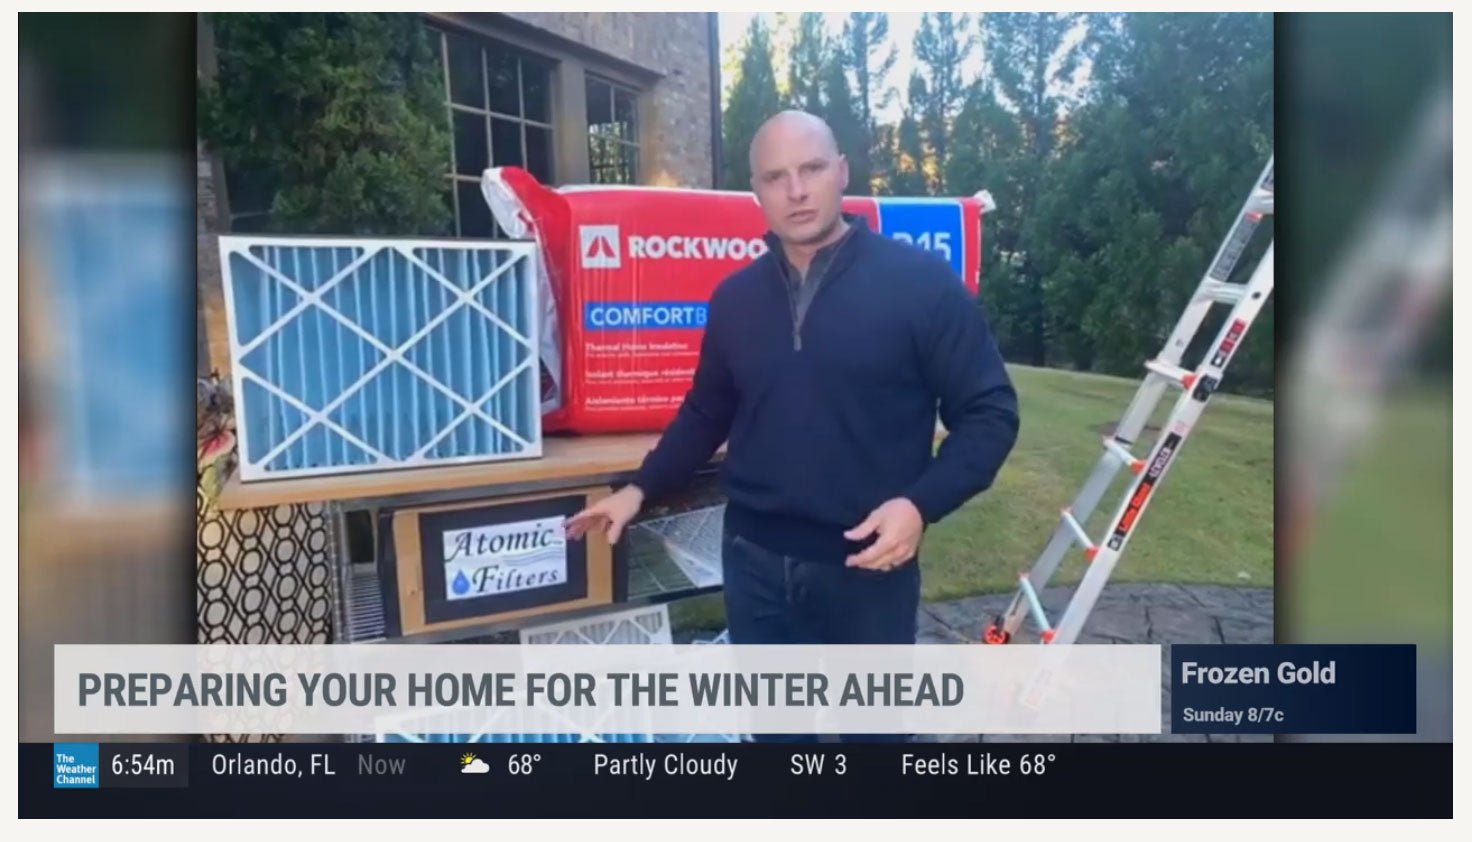 Atomic Filters Featured On The Weather Channel "Winterizing Your Home" by HGTV's Chip Wade - Atomic Filters